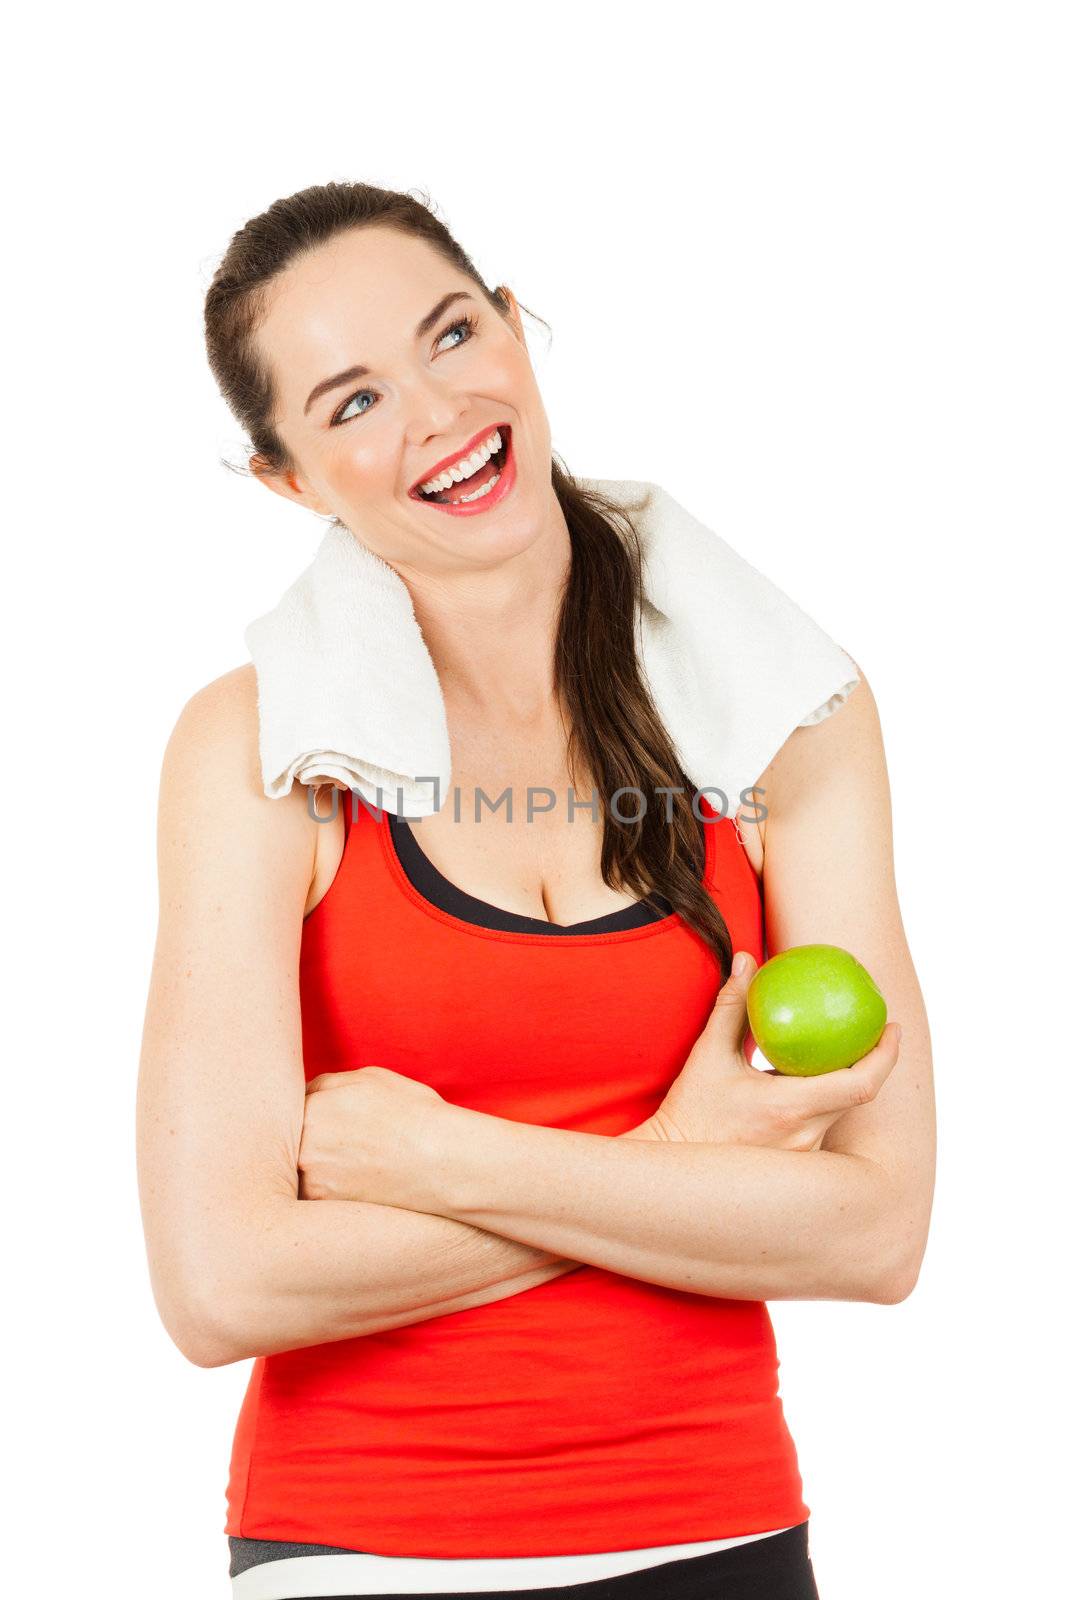 Young smiling fit woman holding an apple and looking at copyspace after exercise. Isolated on white.